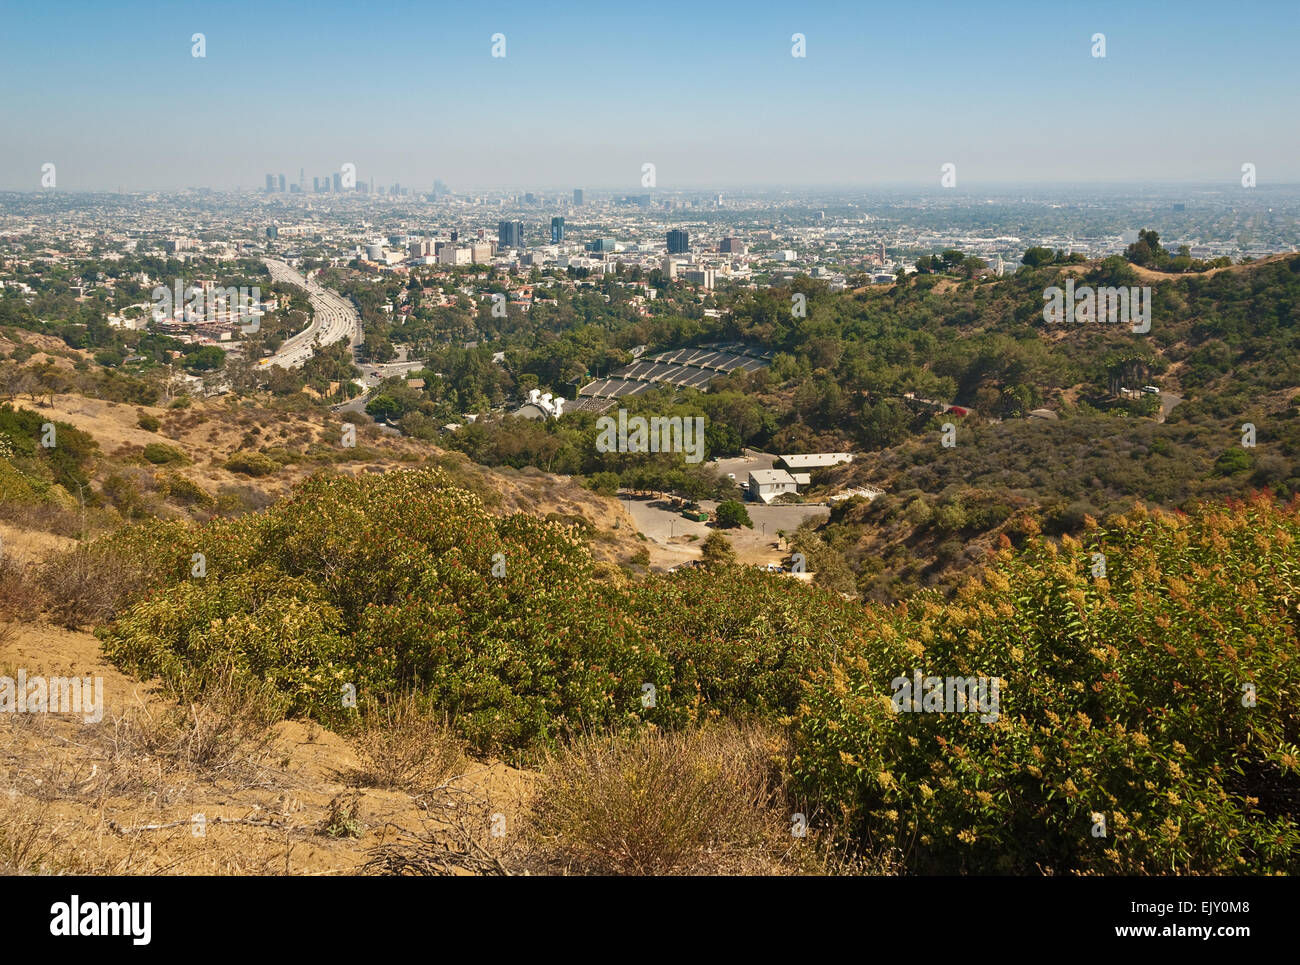 Skyline von Los Angeles aus der Hollywood Bowl Overlook am Mulholland Drive in den Hollywood Hills of Southern California. Stockfoto